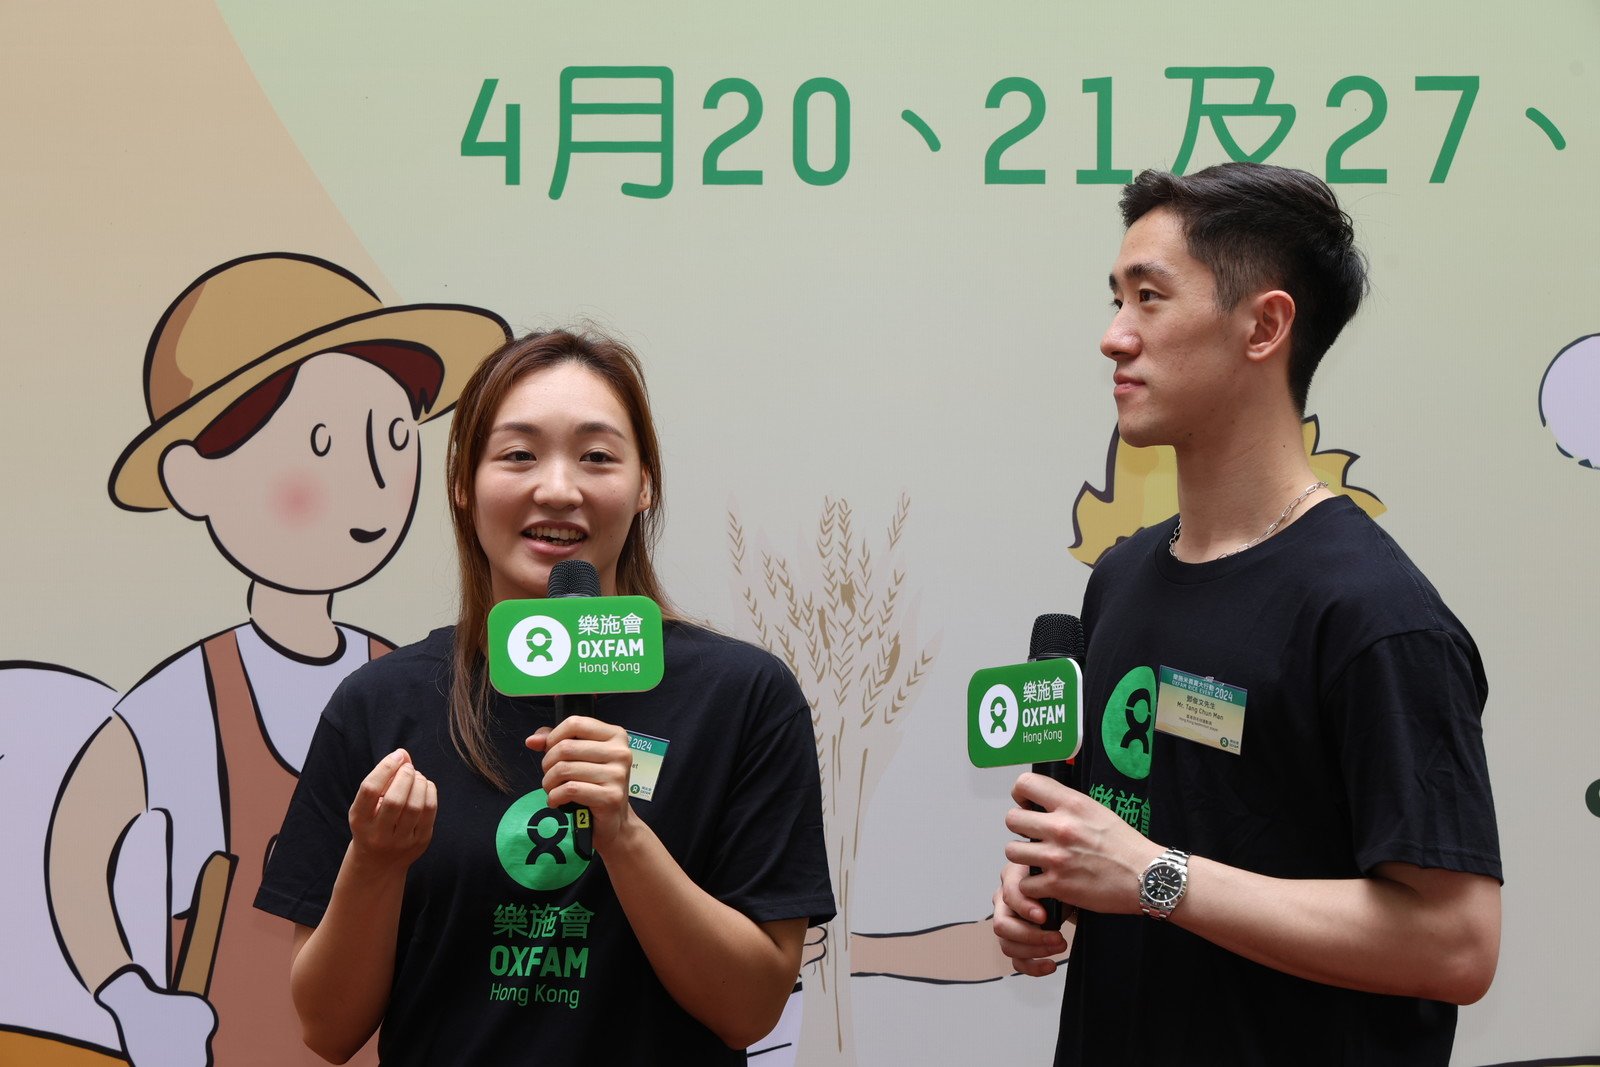 Hong Kong badminton player Tang Chun Man (left) and Hong Kong badminton player Tse Ying Suet (right) shared their experiences of encountering extreme weather while competing abroad.